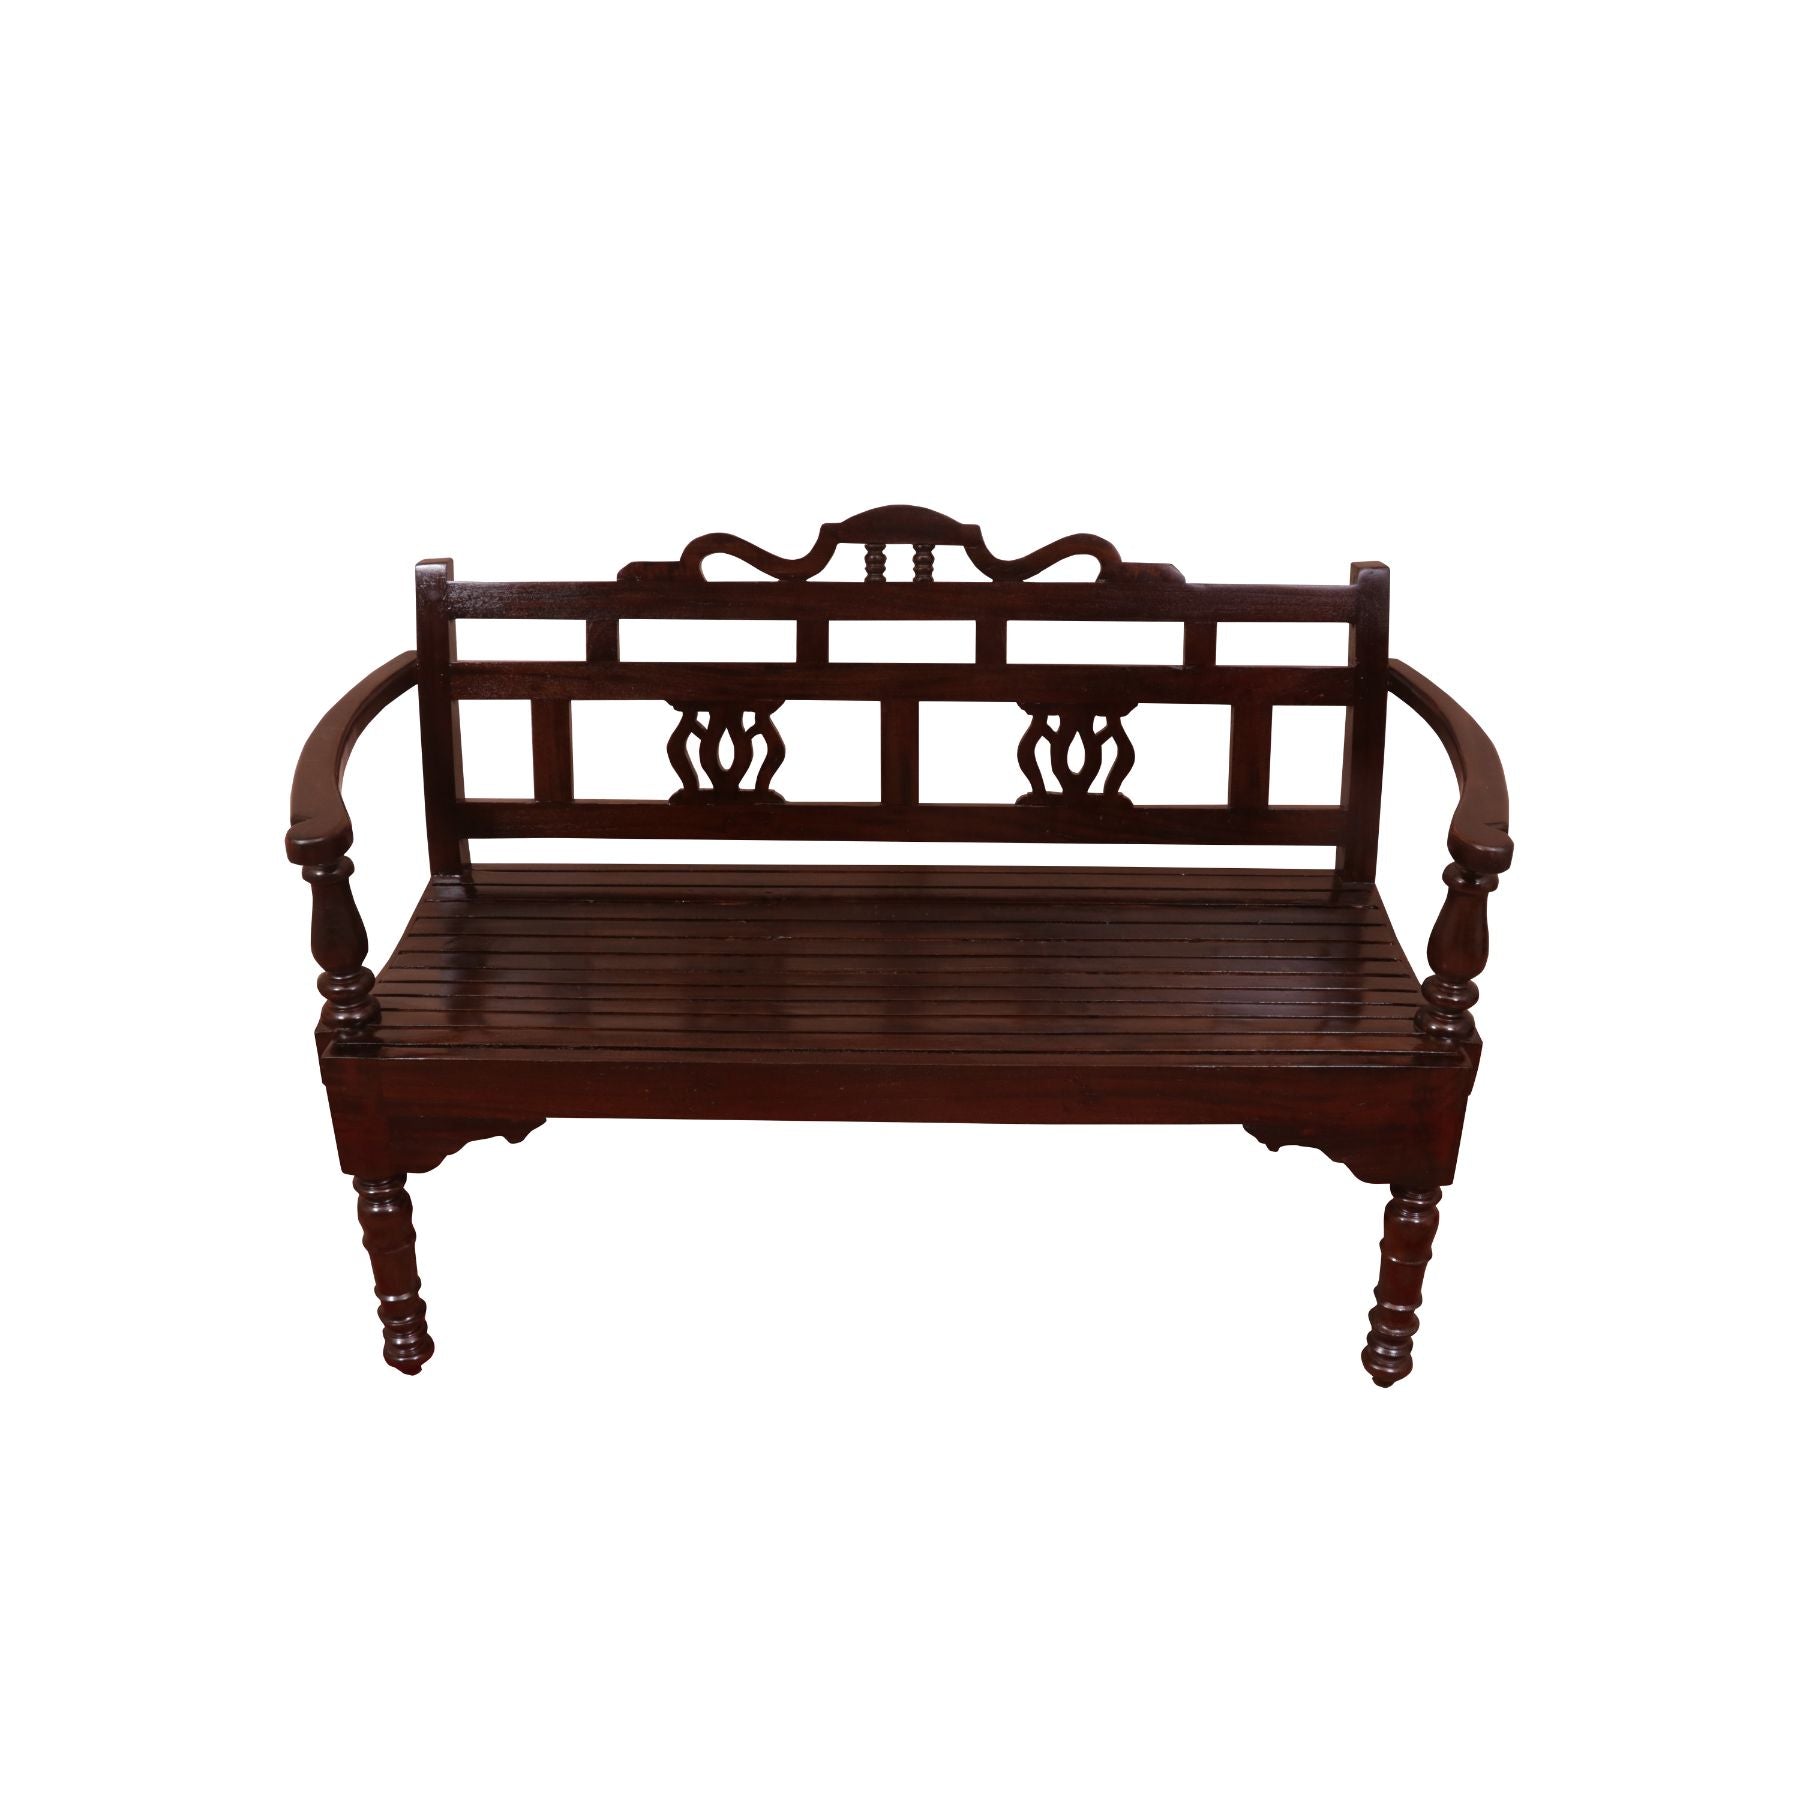 Regal Carved Wooden Bench Bench